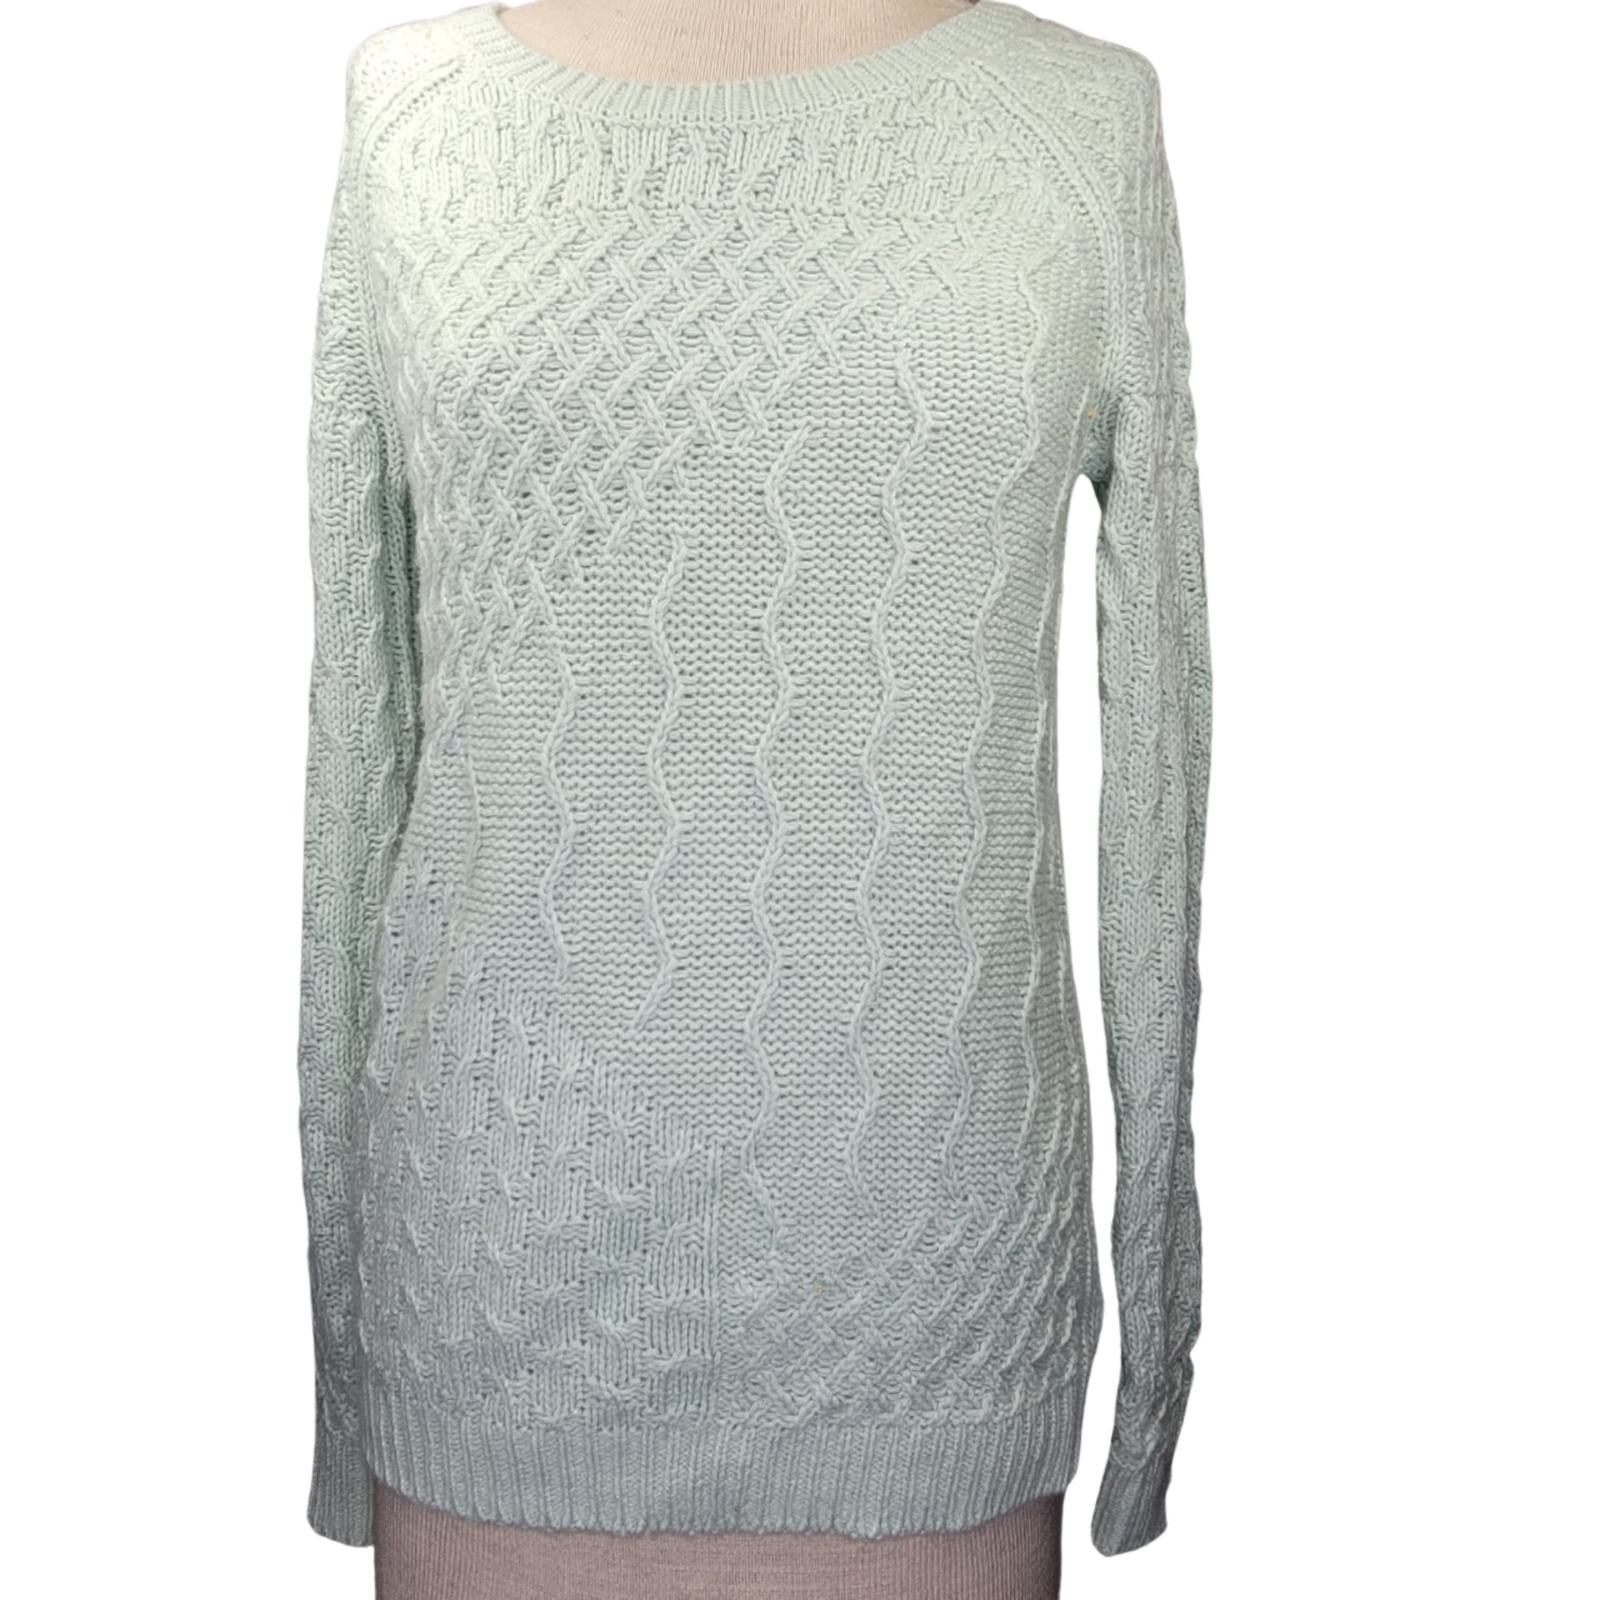 Primary image for Mint Green Sweater Size Medium